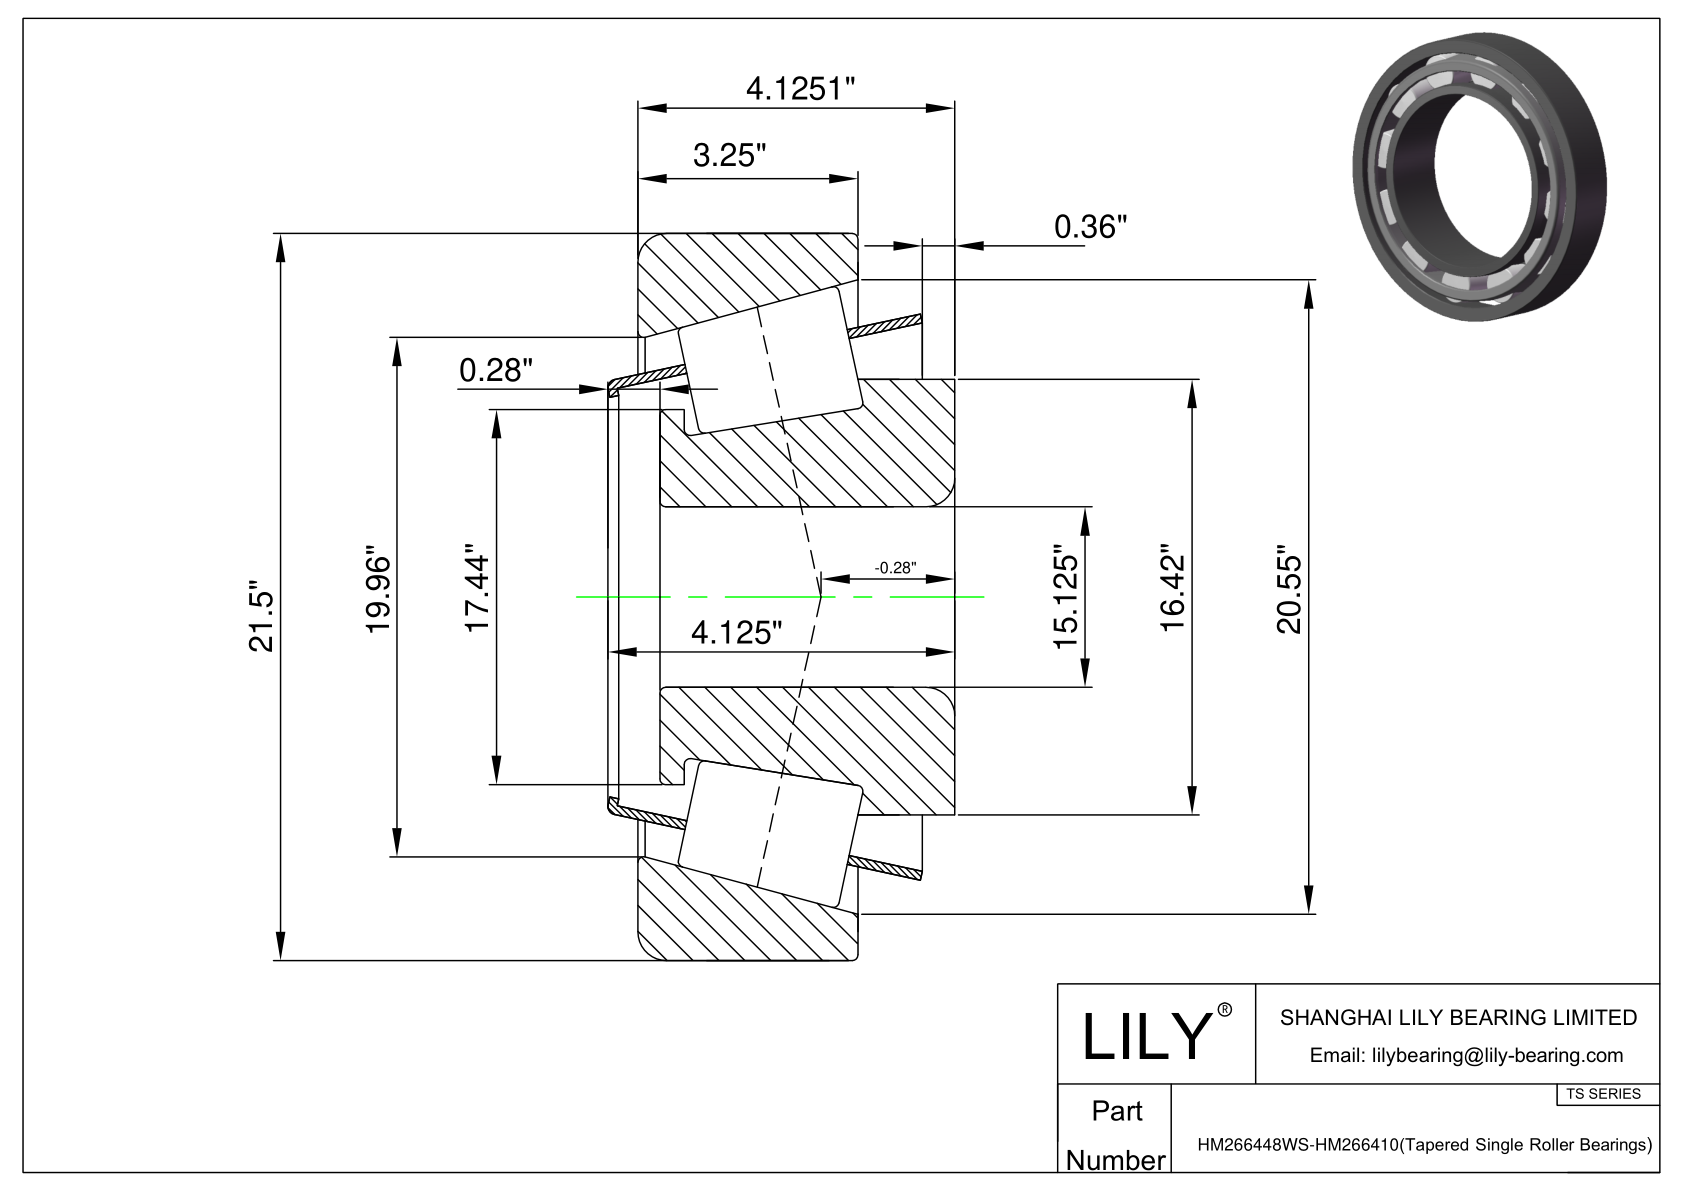 HM266448WS-HM266410 TS (Tapered Single Roller Bearings) (Imperial) cad drawing